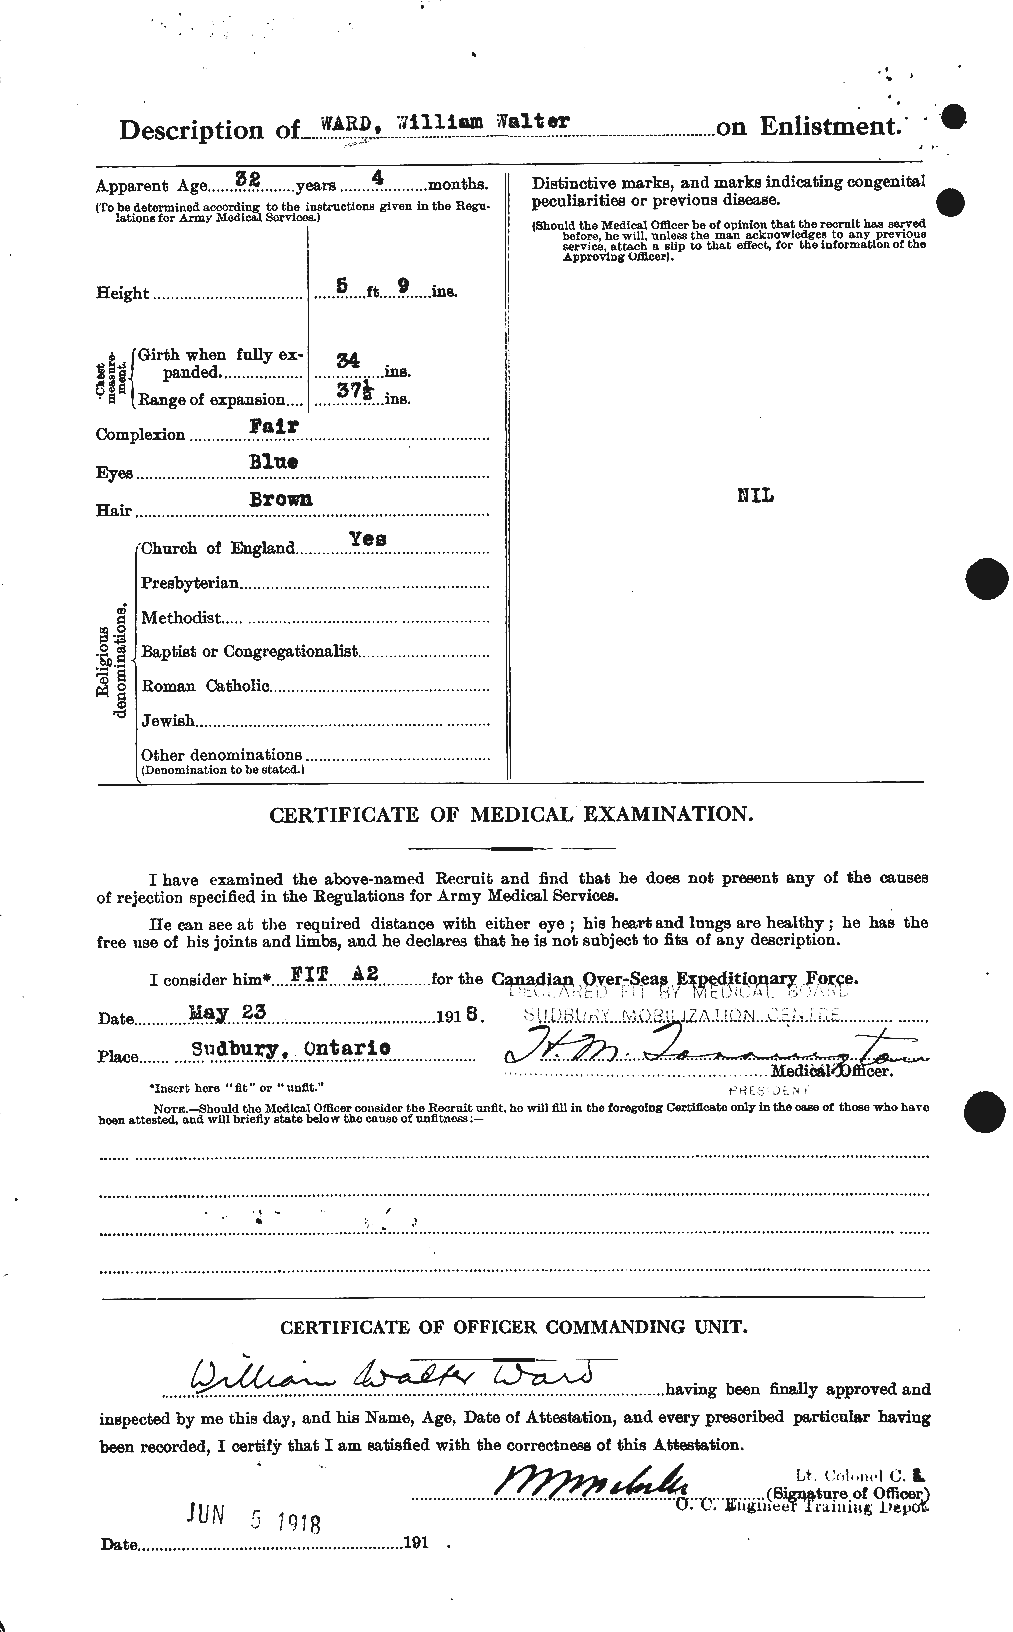 Personnel Records of the First World War - CEF 659848b